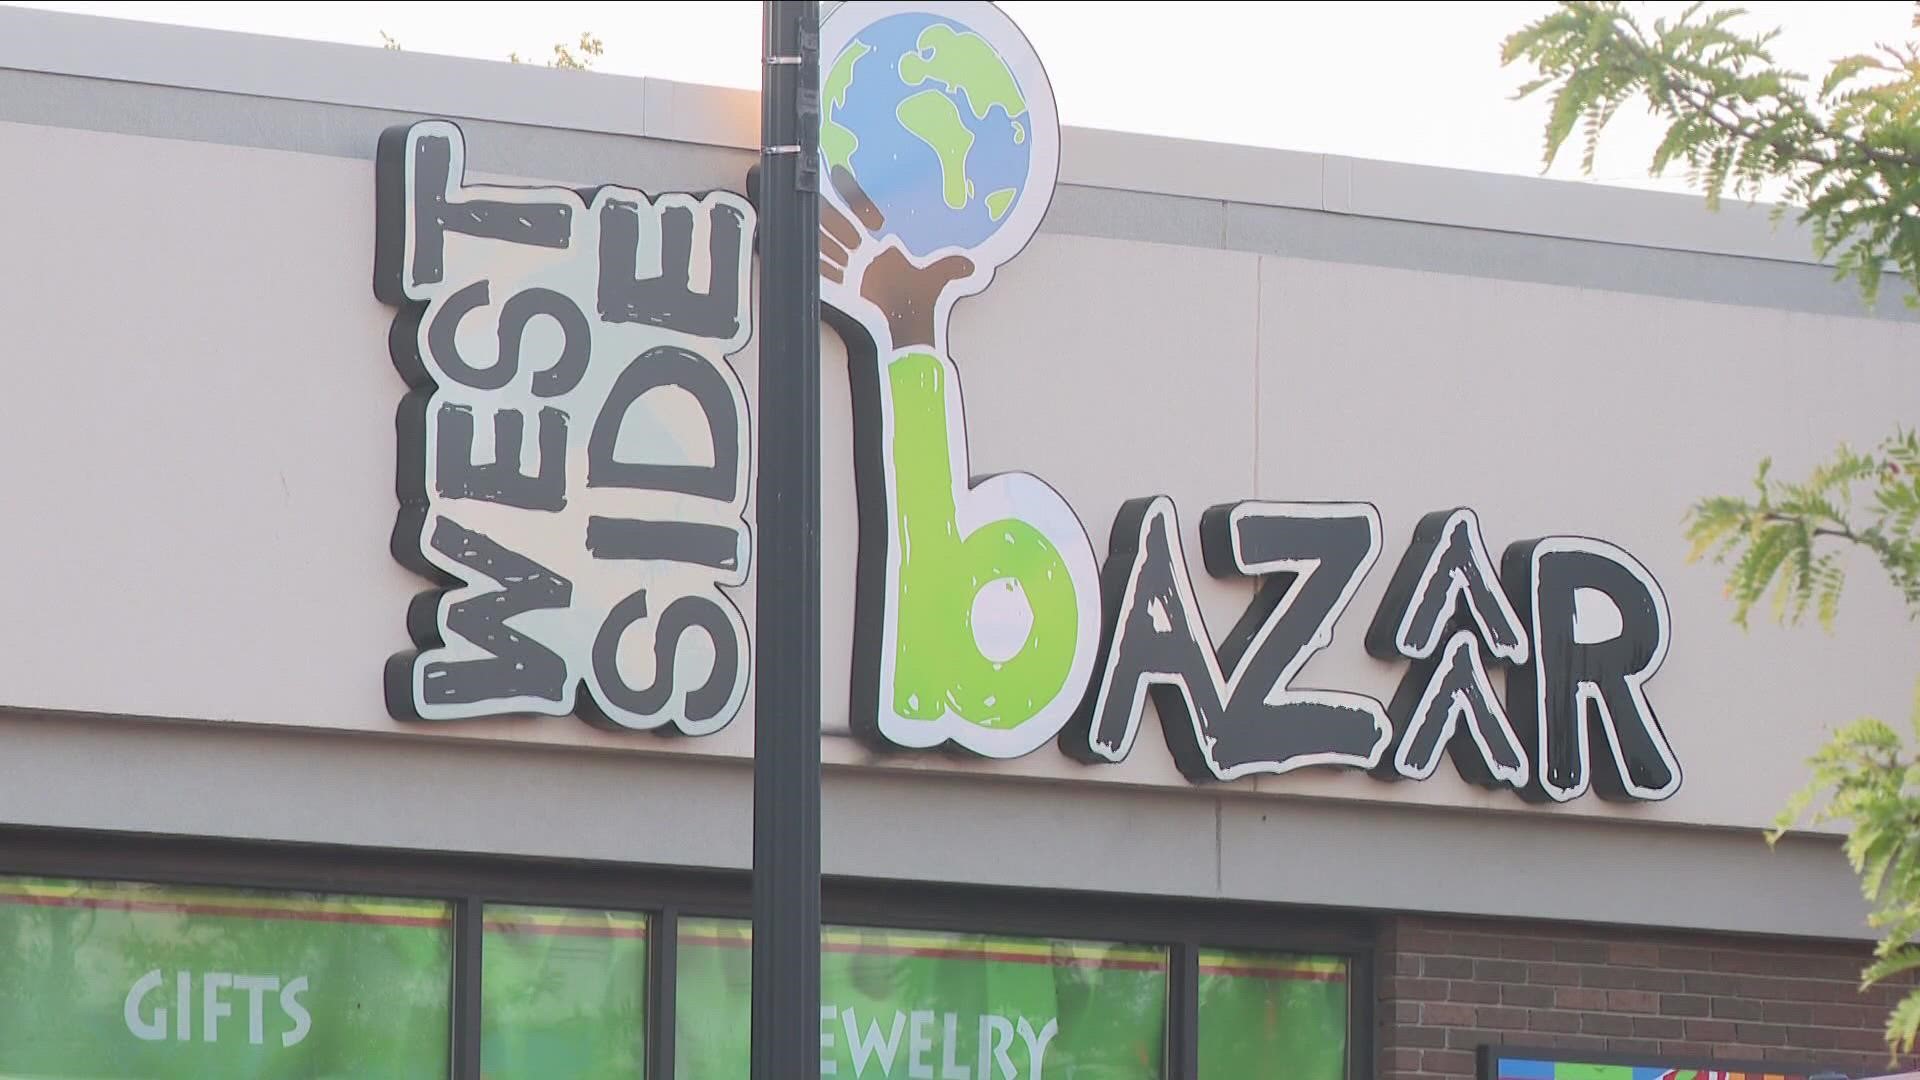 West side Bazaar finds a new temporary home at Expo on Main street downtown